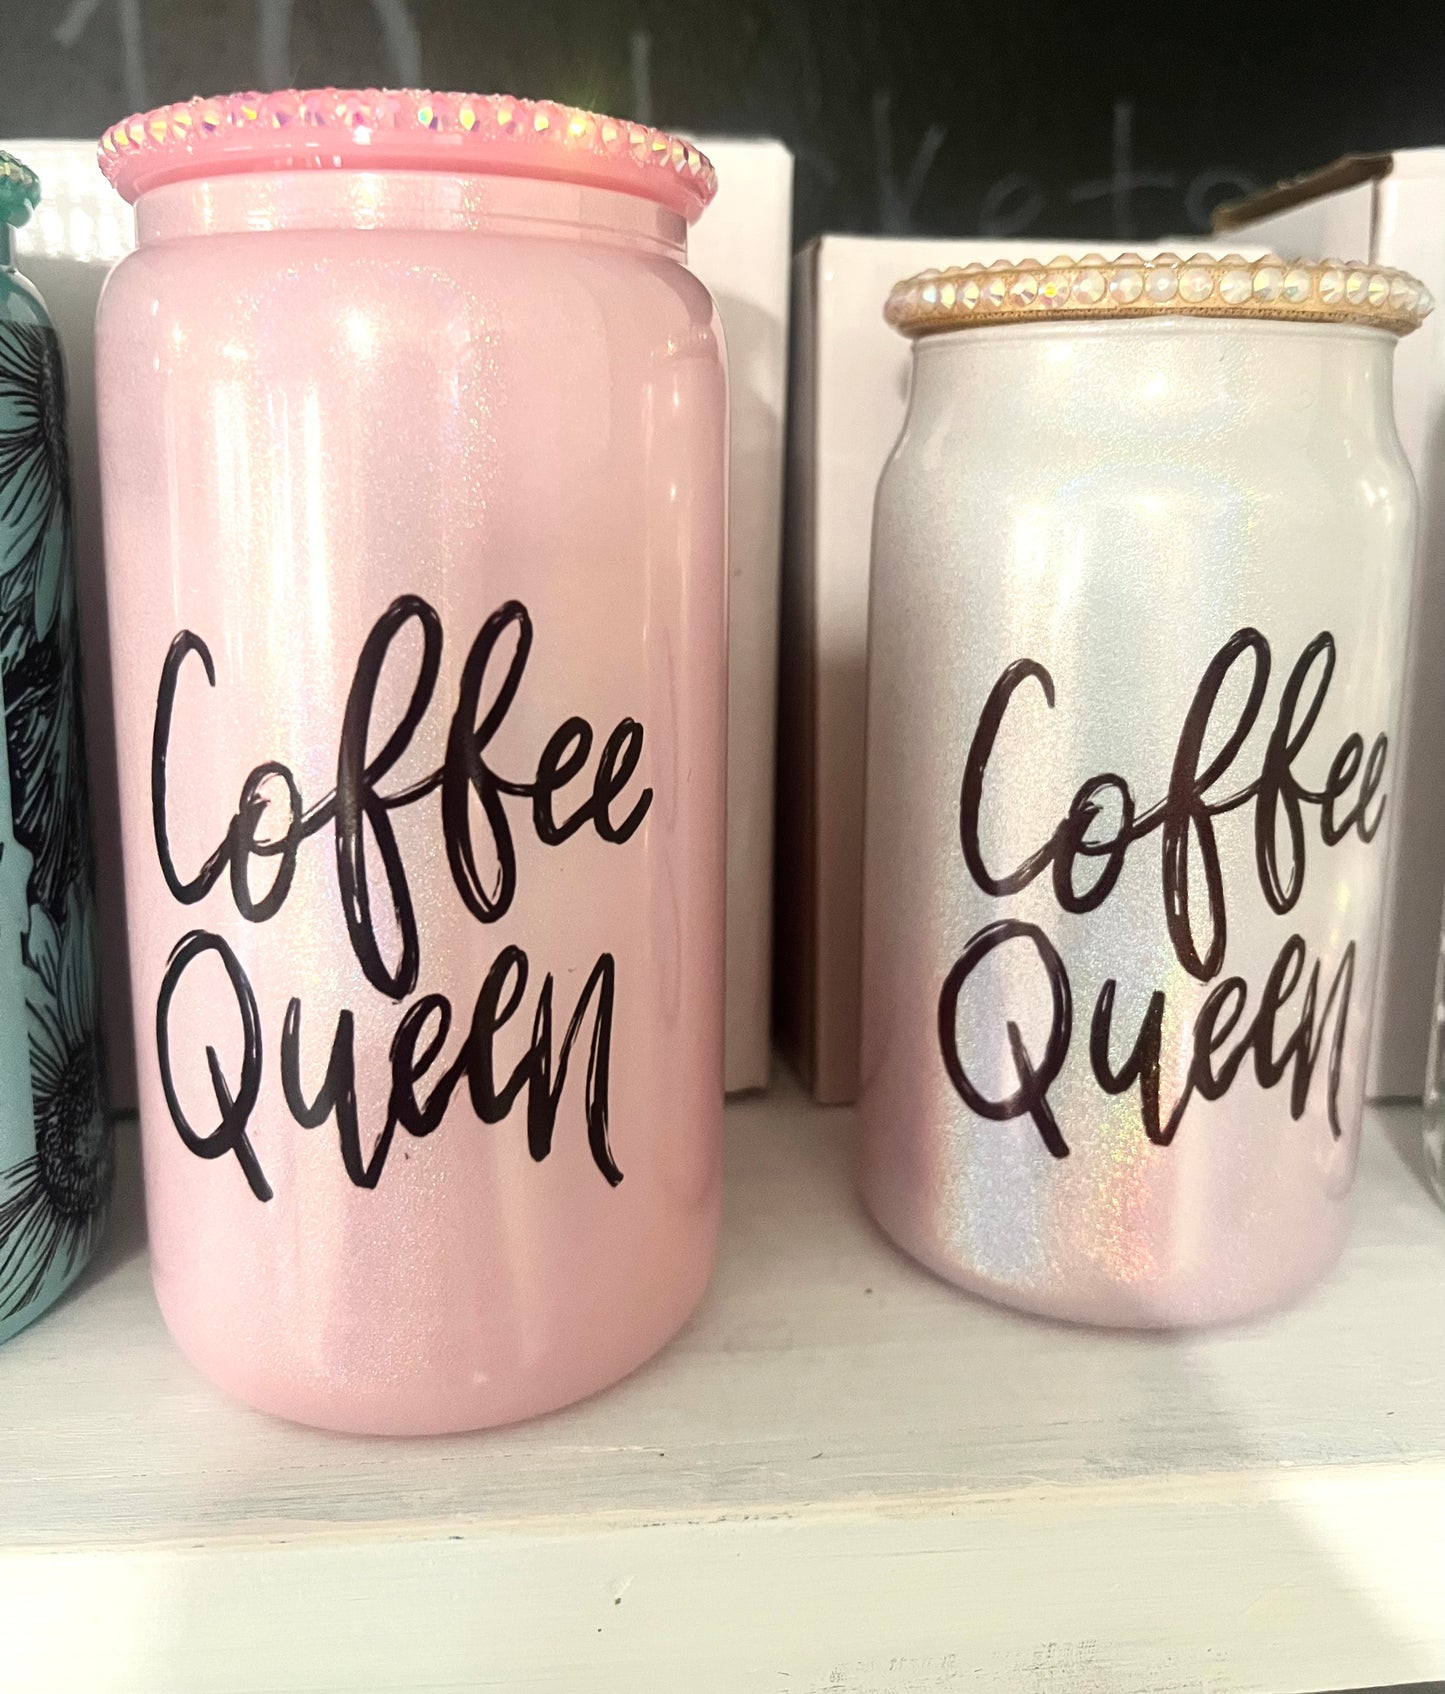 16oz Libby Glass - “Coffee Queen”